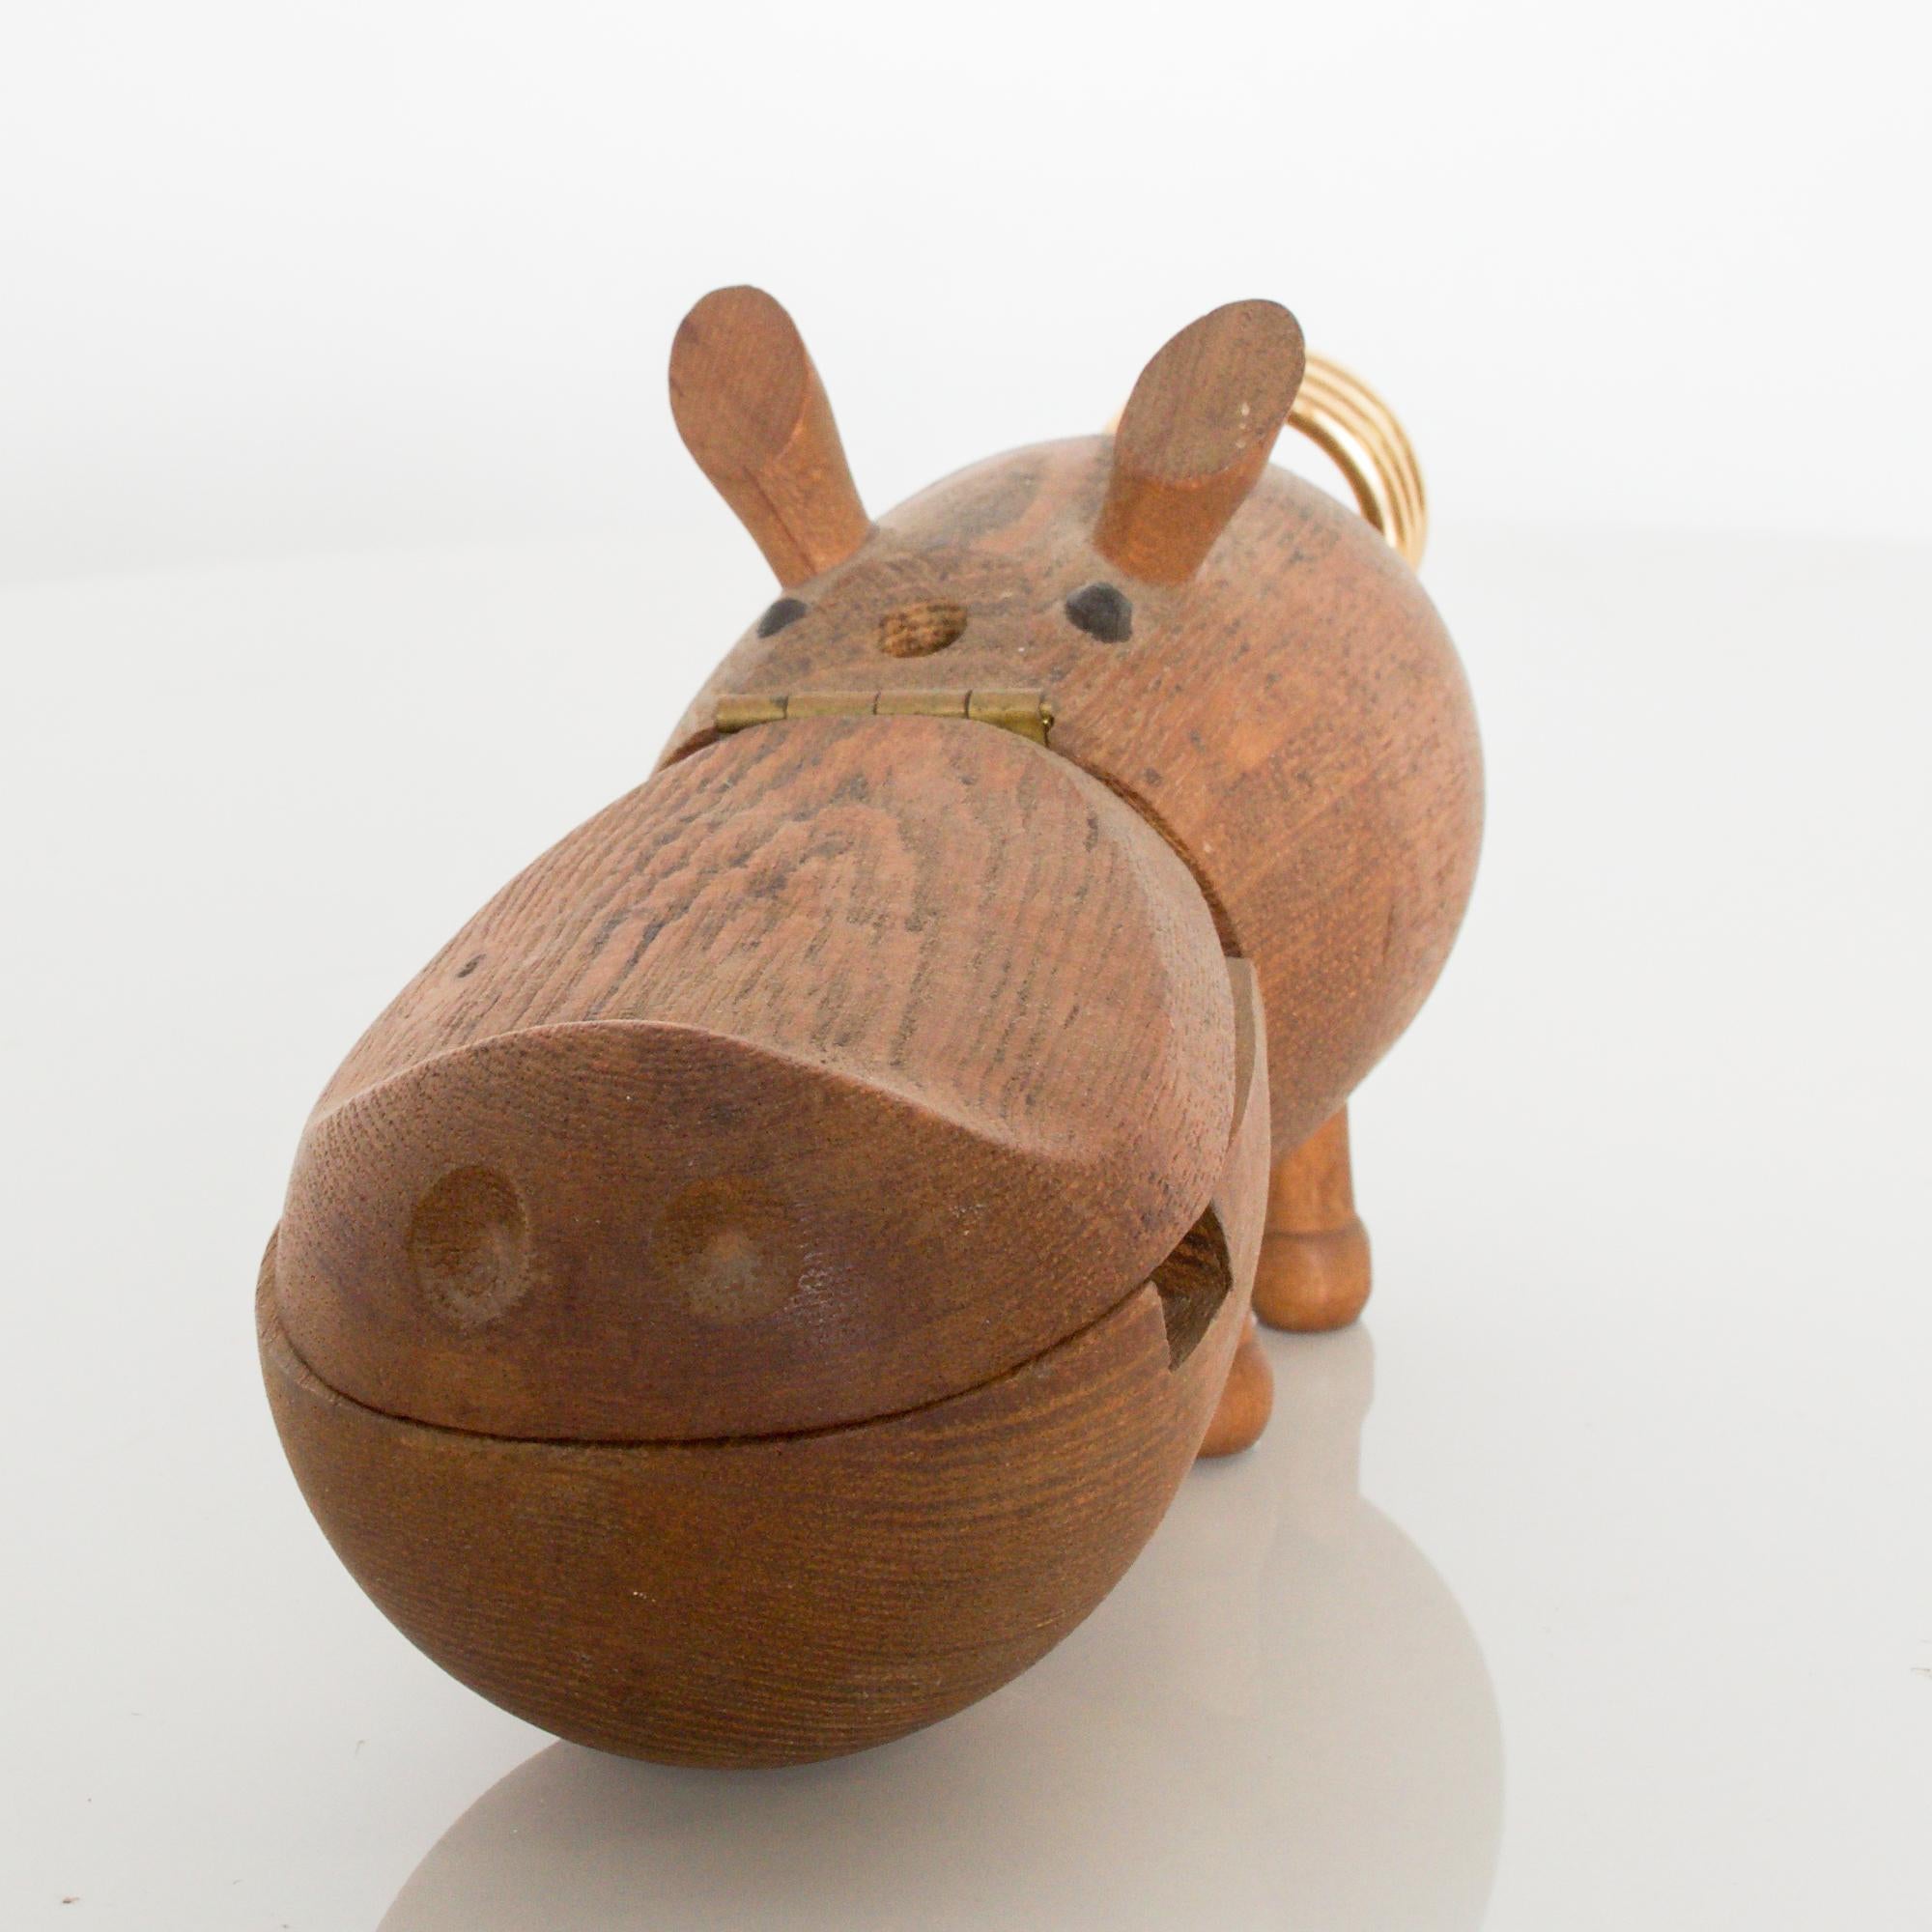 1950s Zoo Line teak carved wood whimsical hippo desk accessory or manicure organizer exclusively made by Swank of Japan for Zoo-Line based in Los Angeles, California.
Dimensions: 7